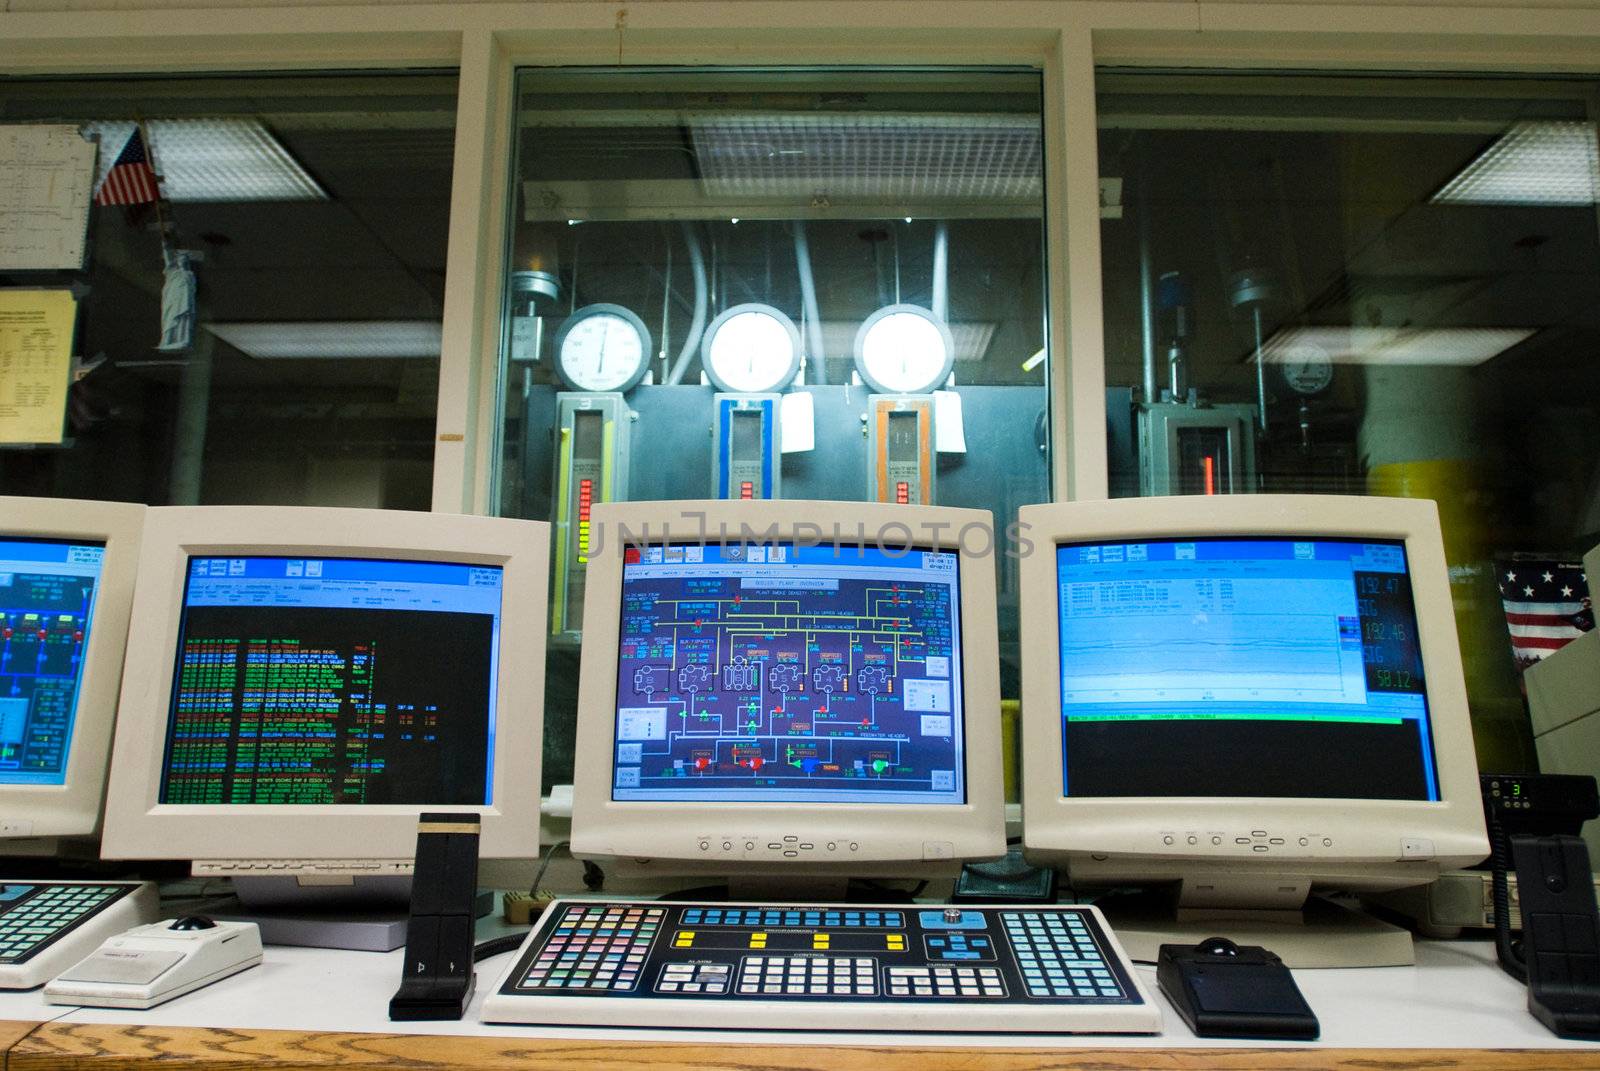 Central control console in an industrial facility